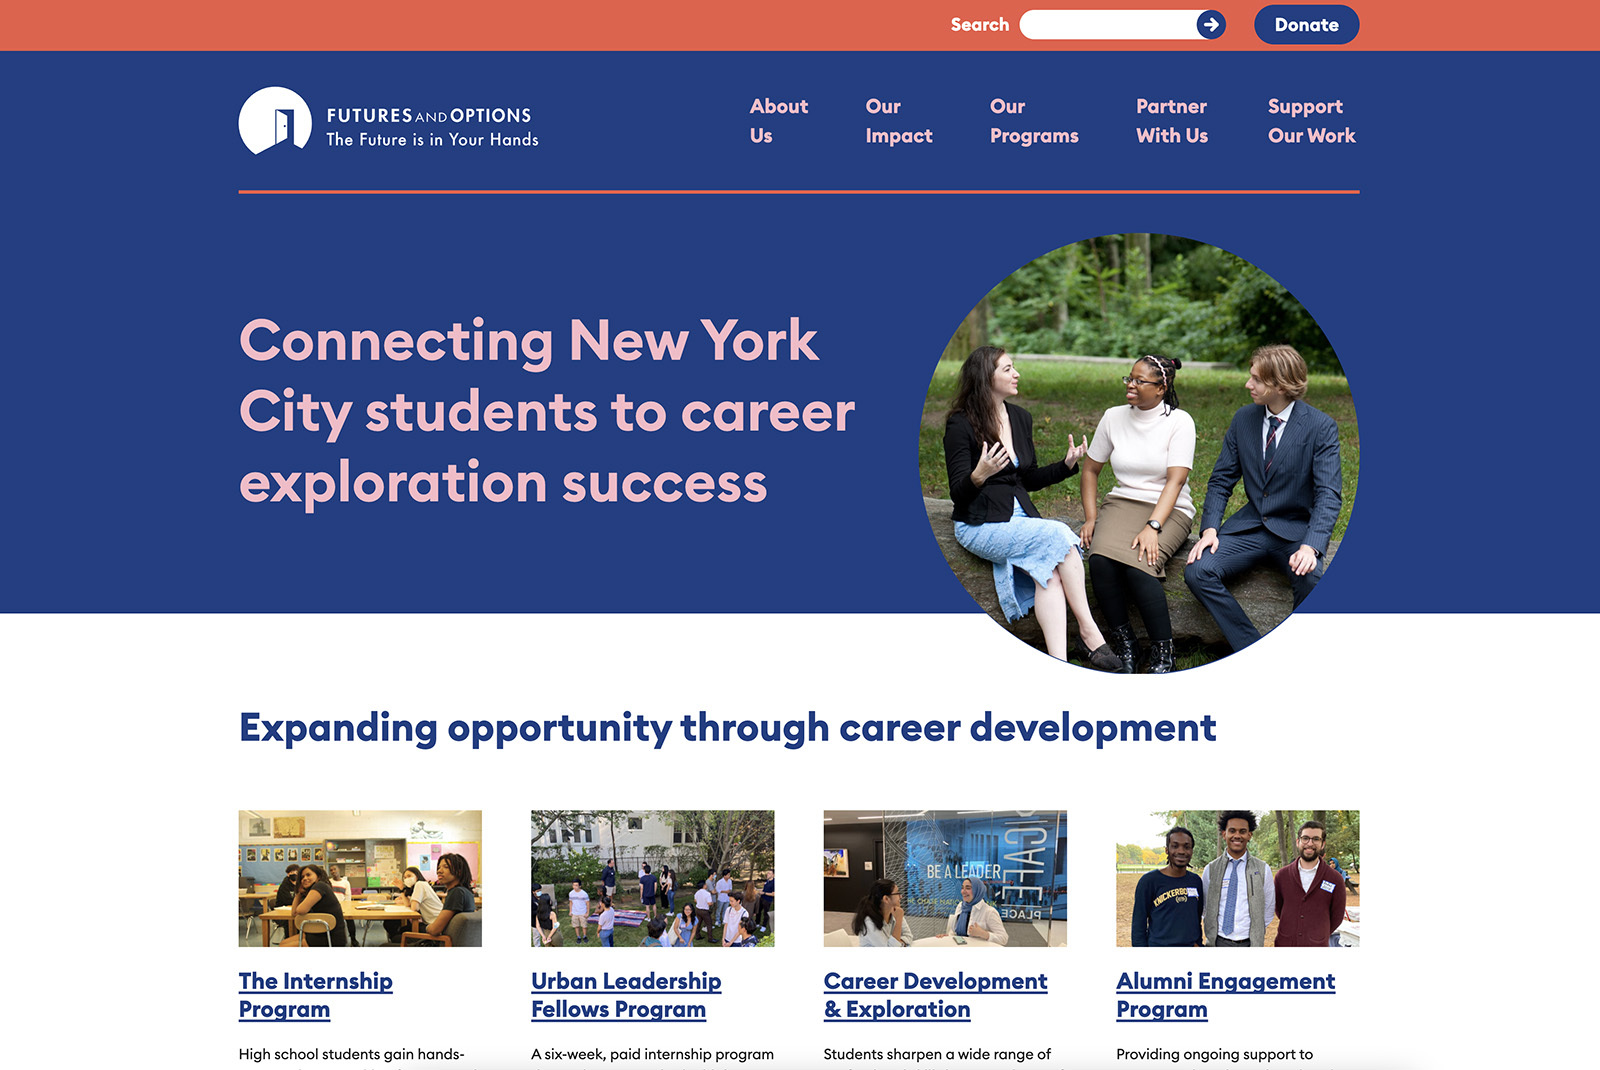 Futures and Options homepage showing 3 high-school-aged students dressed in business attire chatting together, says "Connecting New York City students to career exploration success" and "Expanding opportunity through career development"